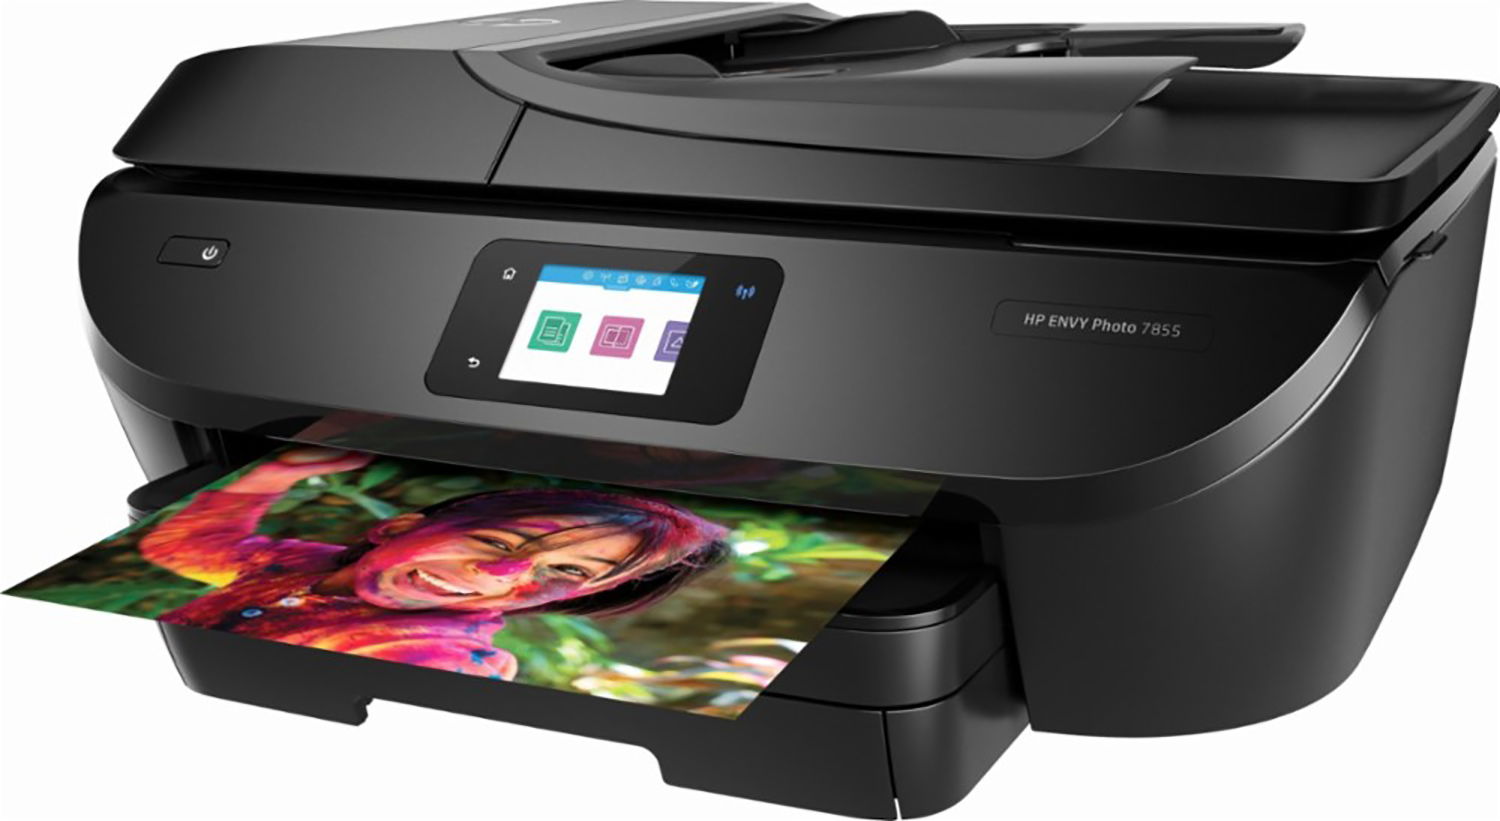 hp smart scan software free download